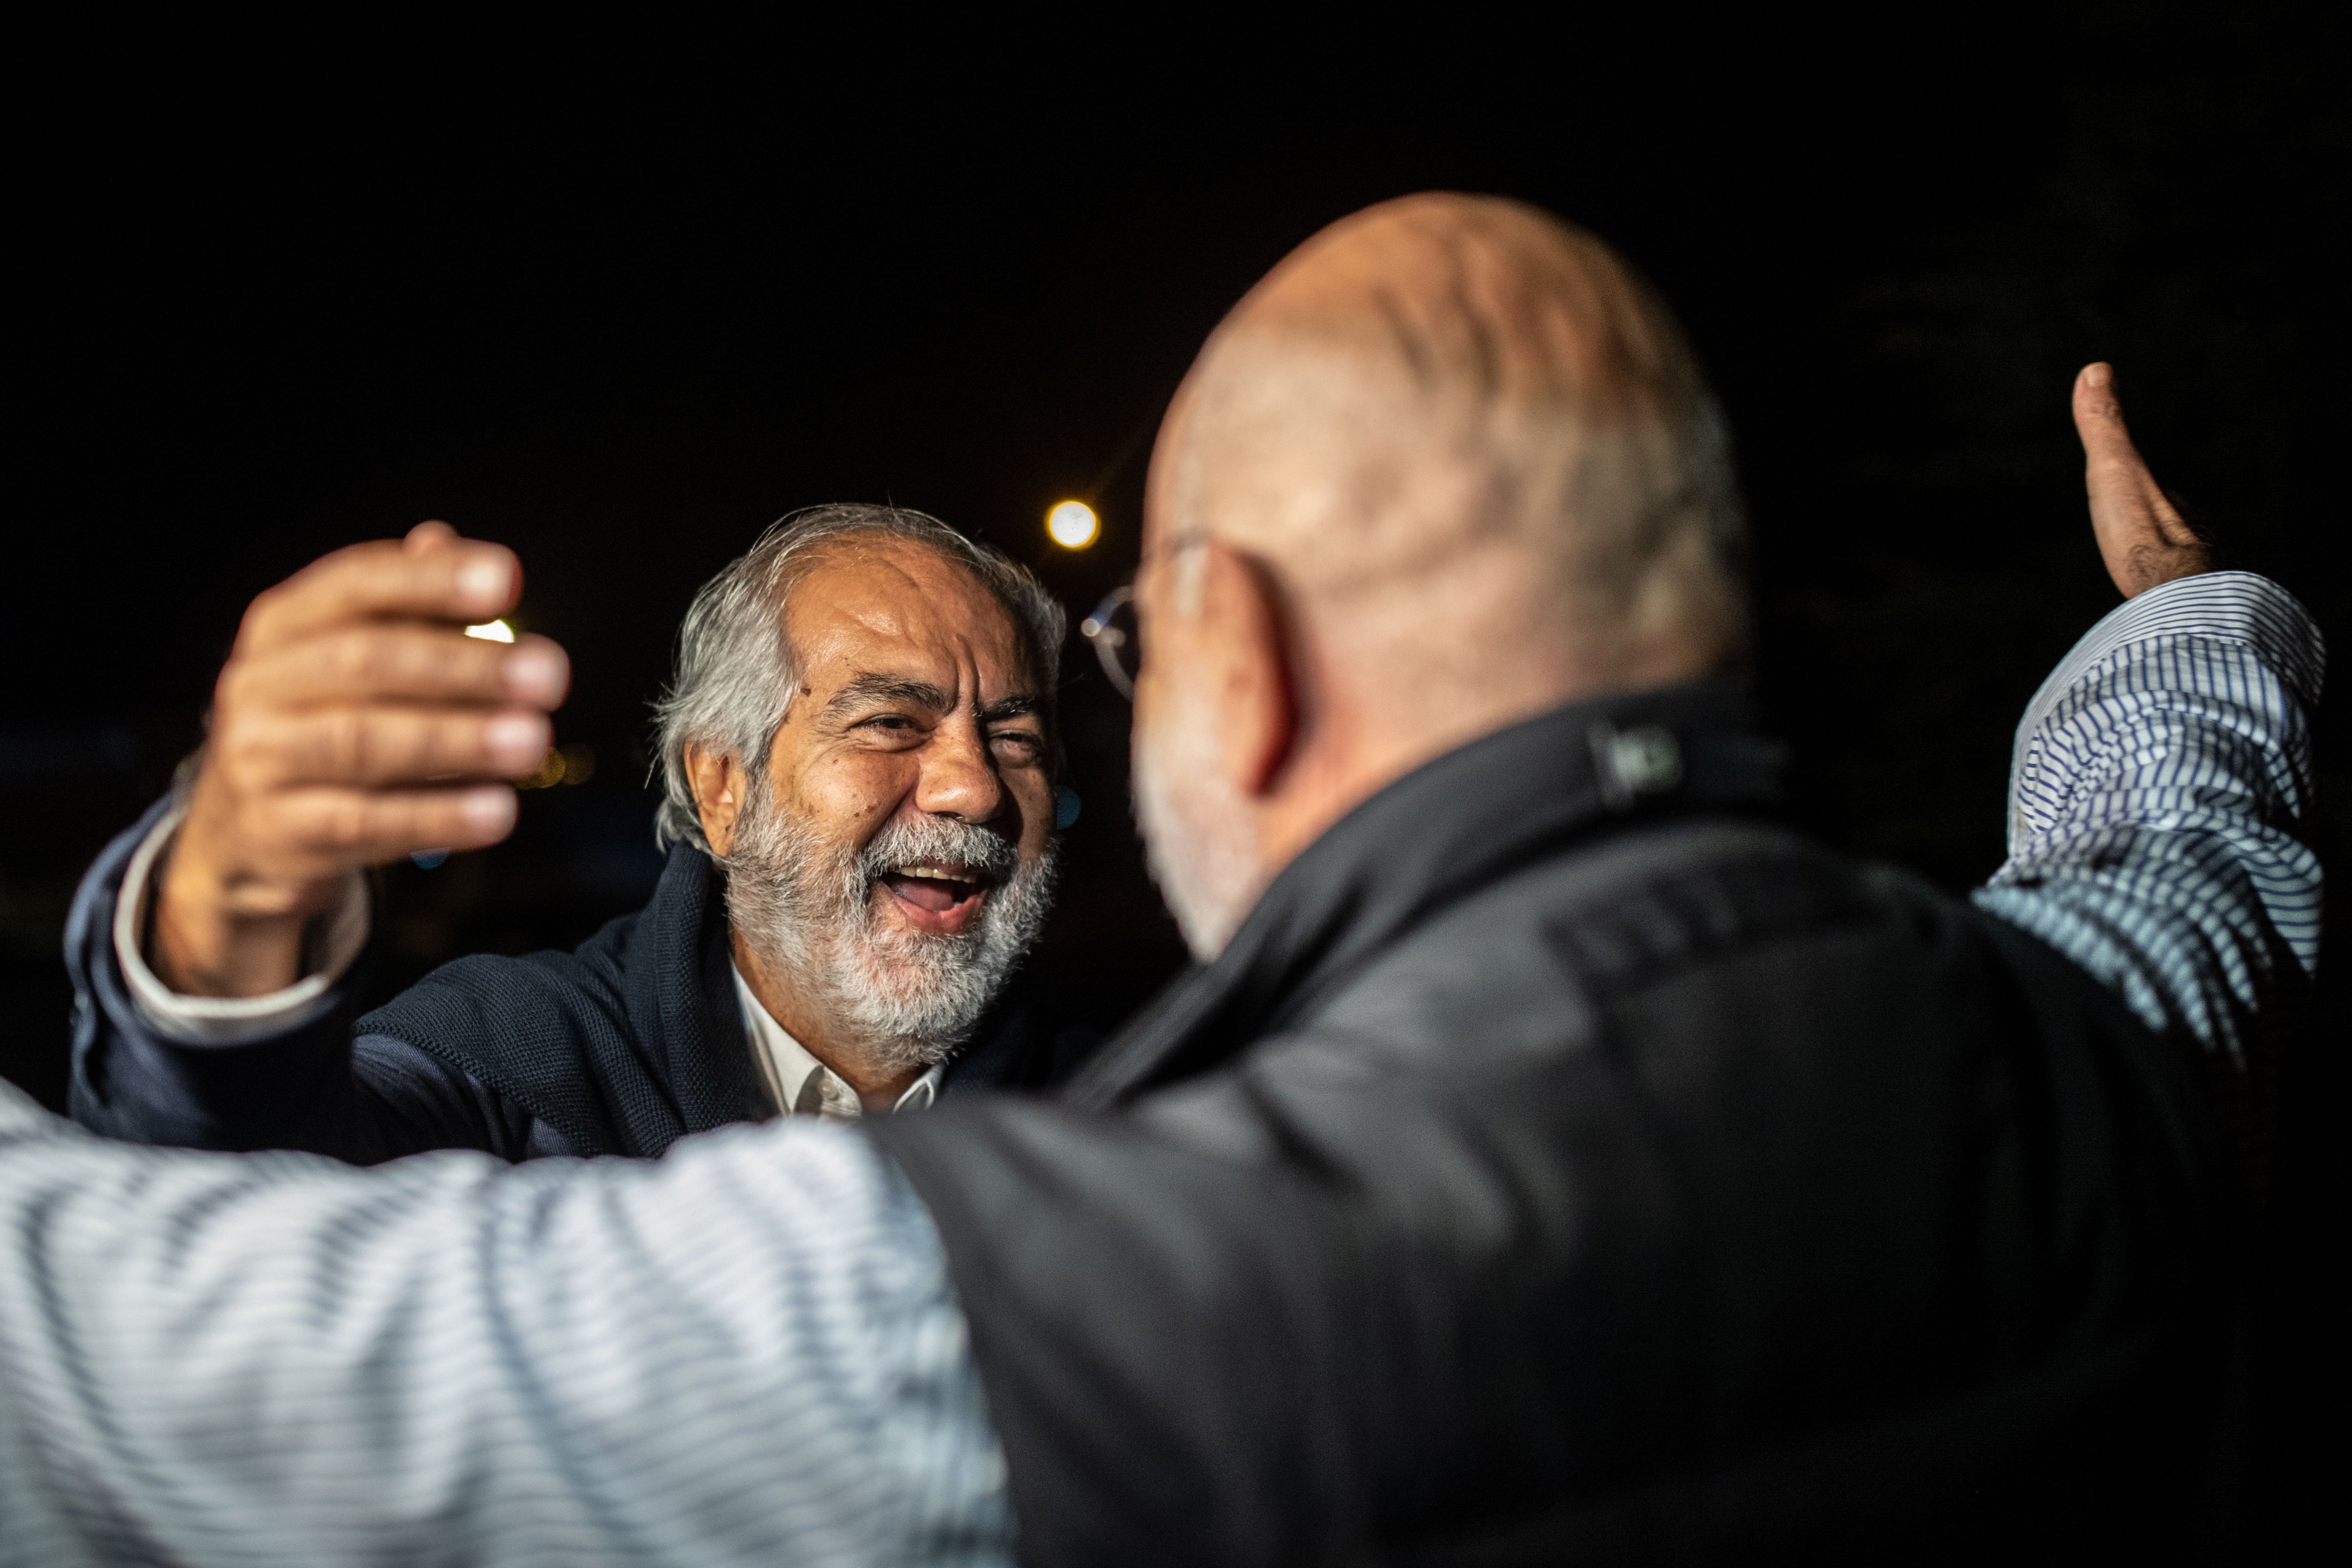 Turkish journalist and writer Ahmet Altan embraces his brother Mehmet (L) after being released on Nov. 4, 2019. Ahmet Altan was re-arrested a week later. (Bulent Kilic—AFP/Getty Images)